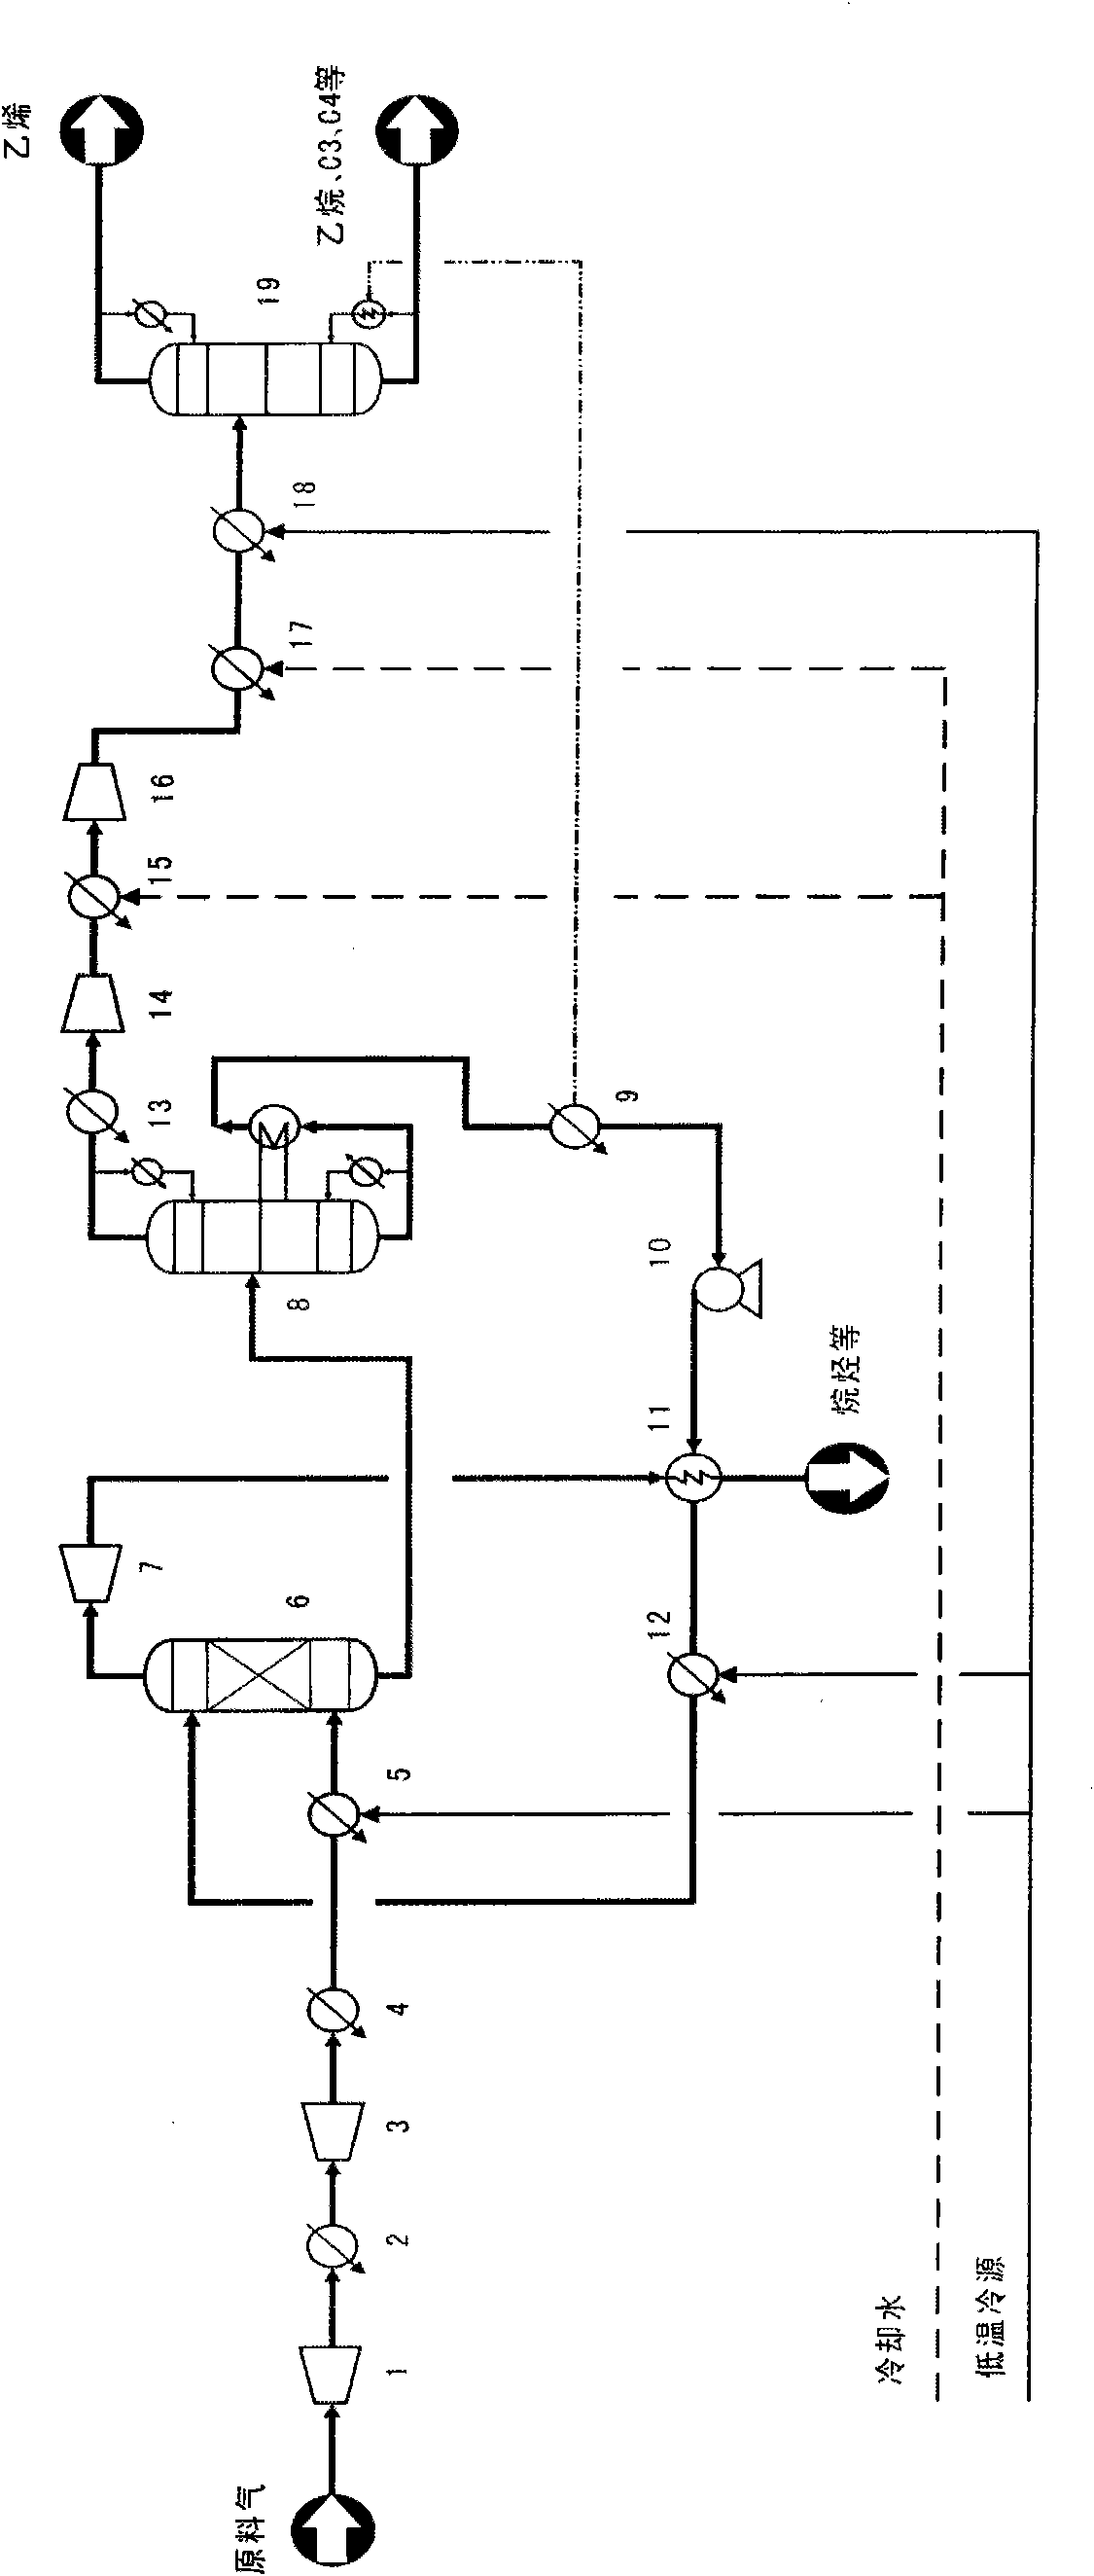 Technical method for recovering ethylene from ethylene containing mixed gas